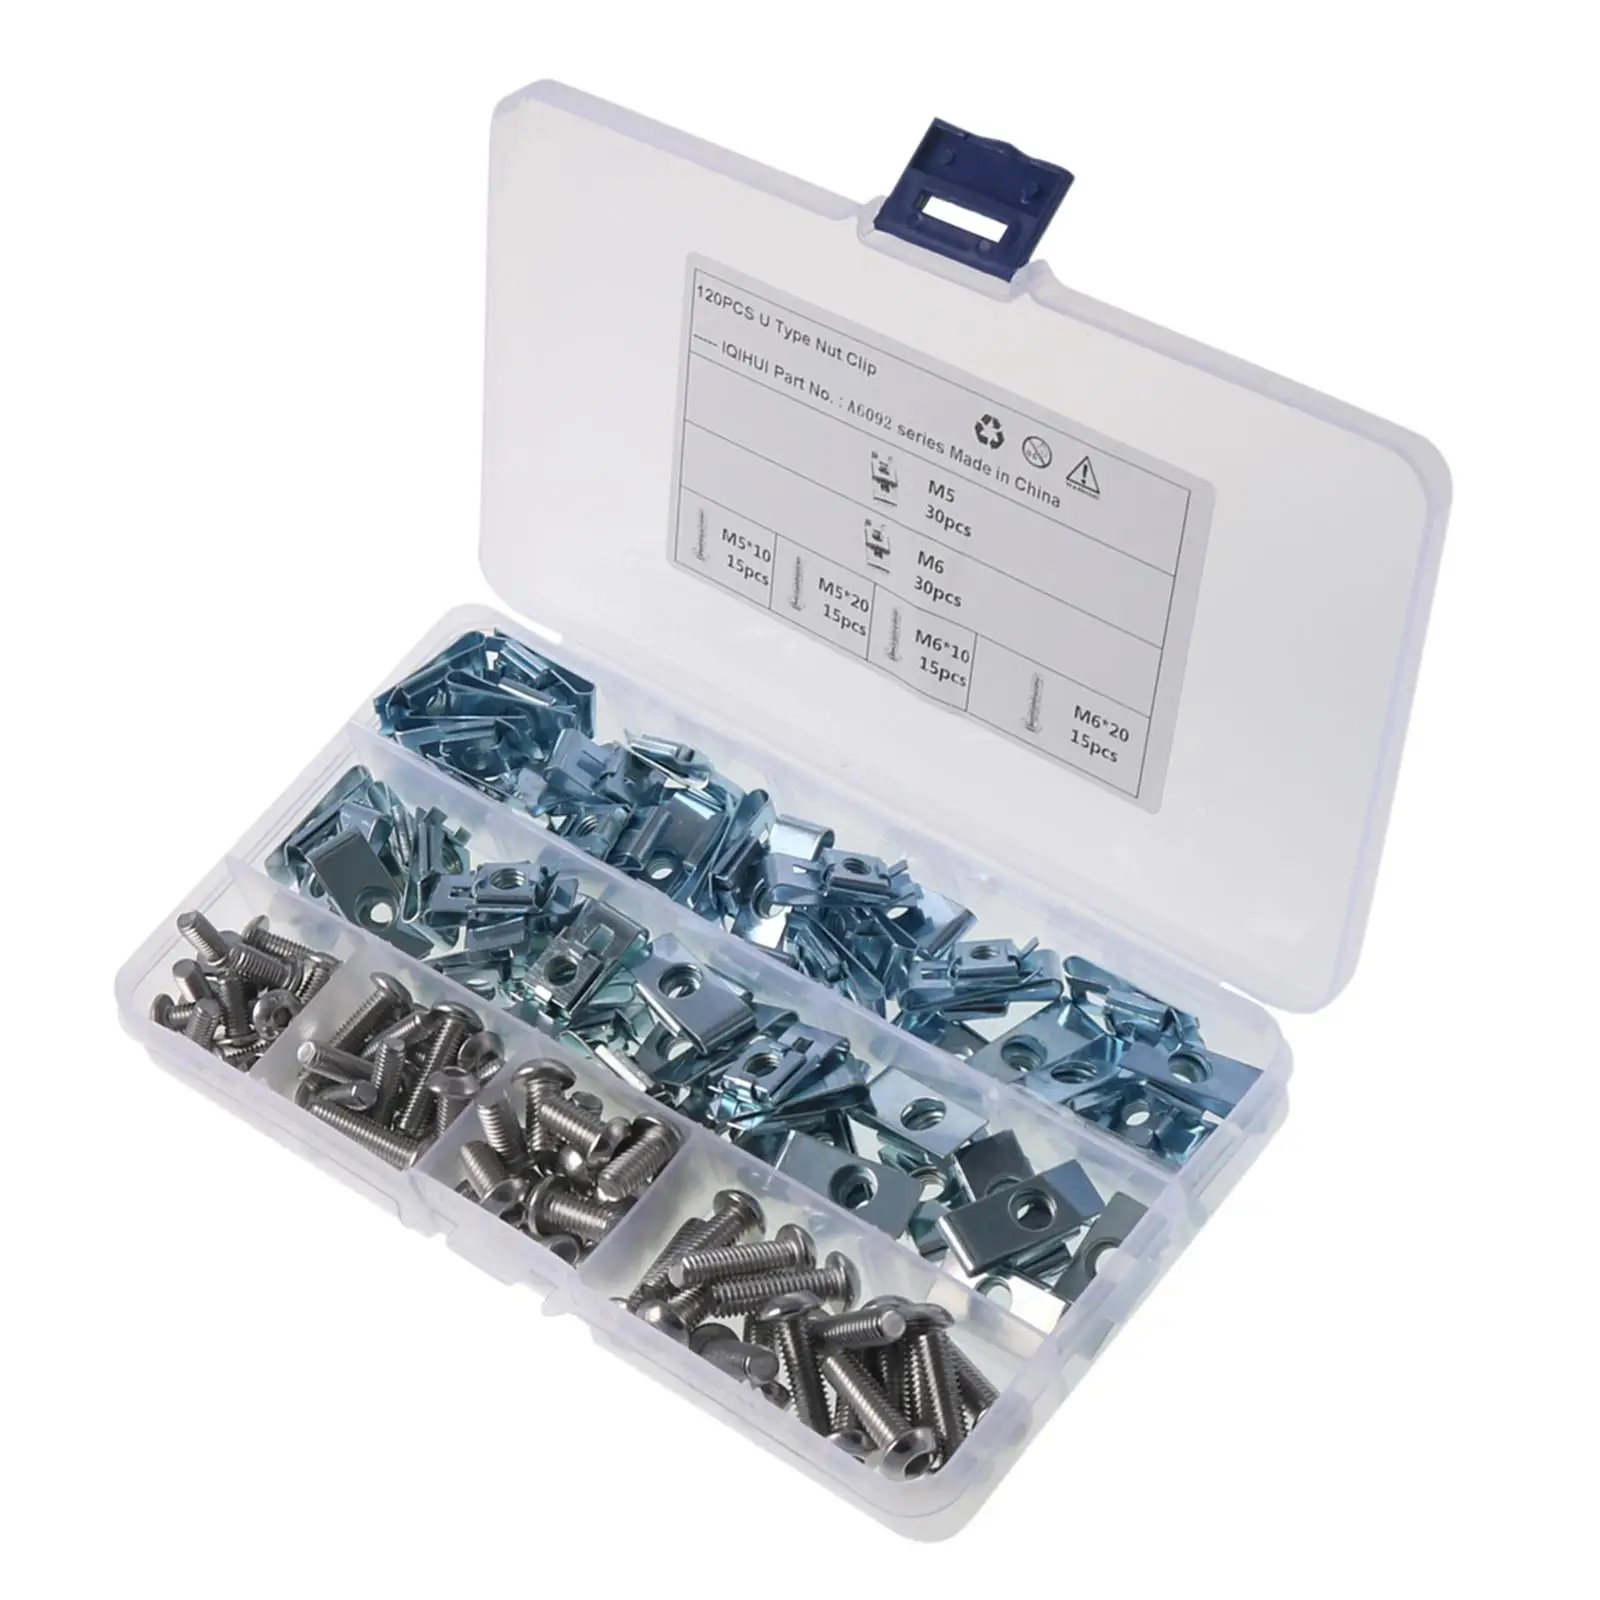 120Pcs Screw Nut Clip Set Accessory Easy Installation Replaces Fixing Bolt Panel Clip Fastener for Automotive Auto Vehicle